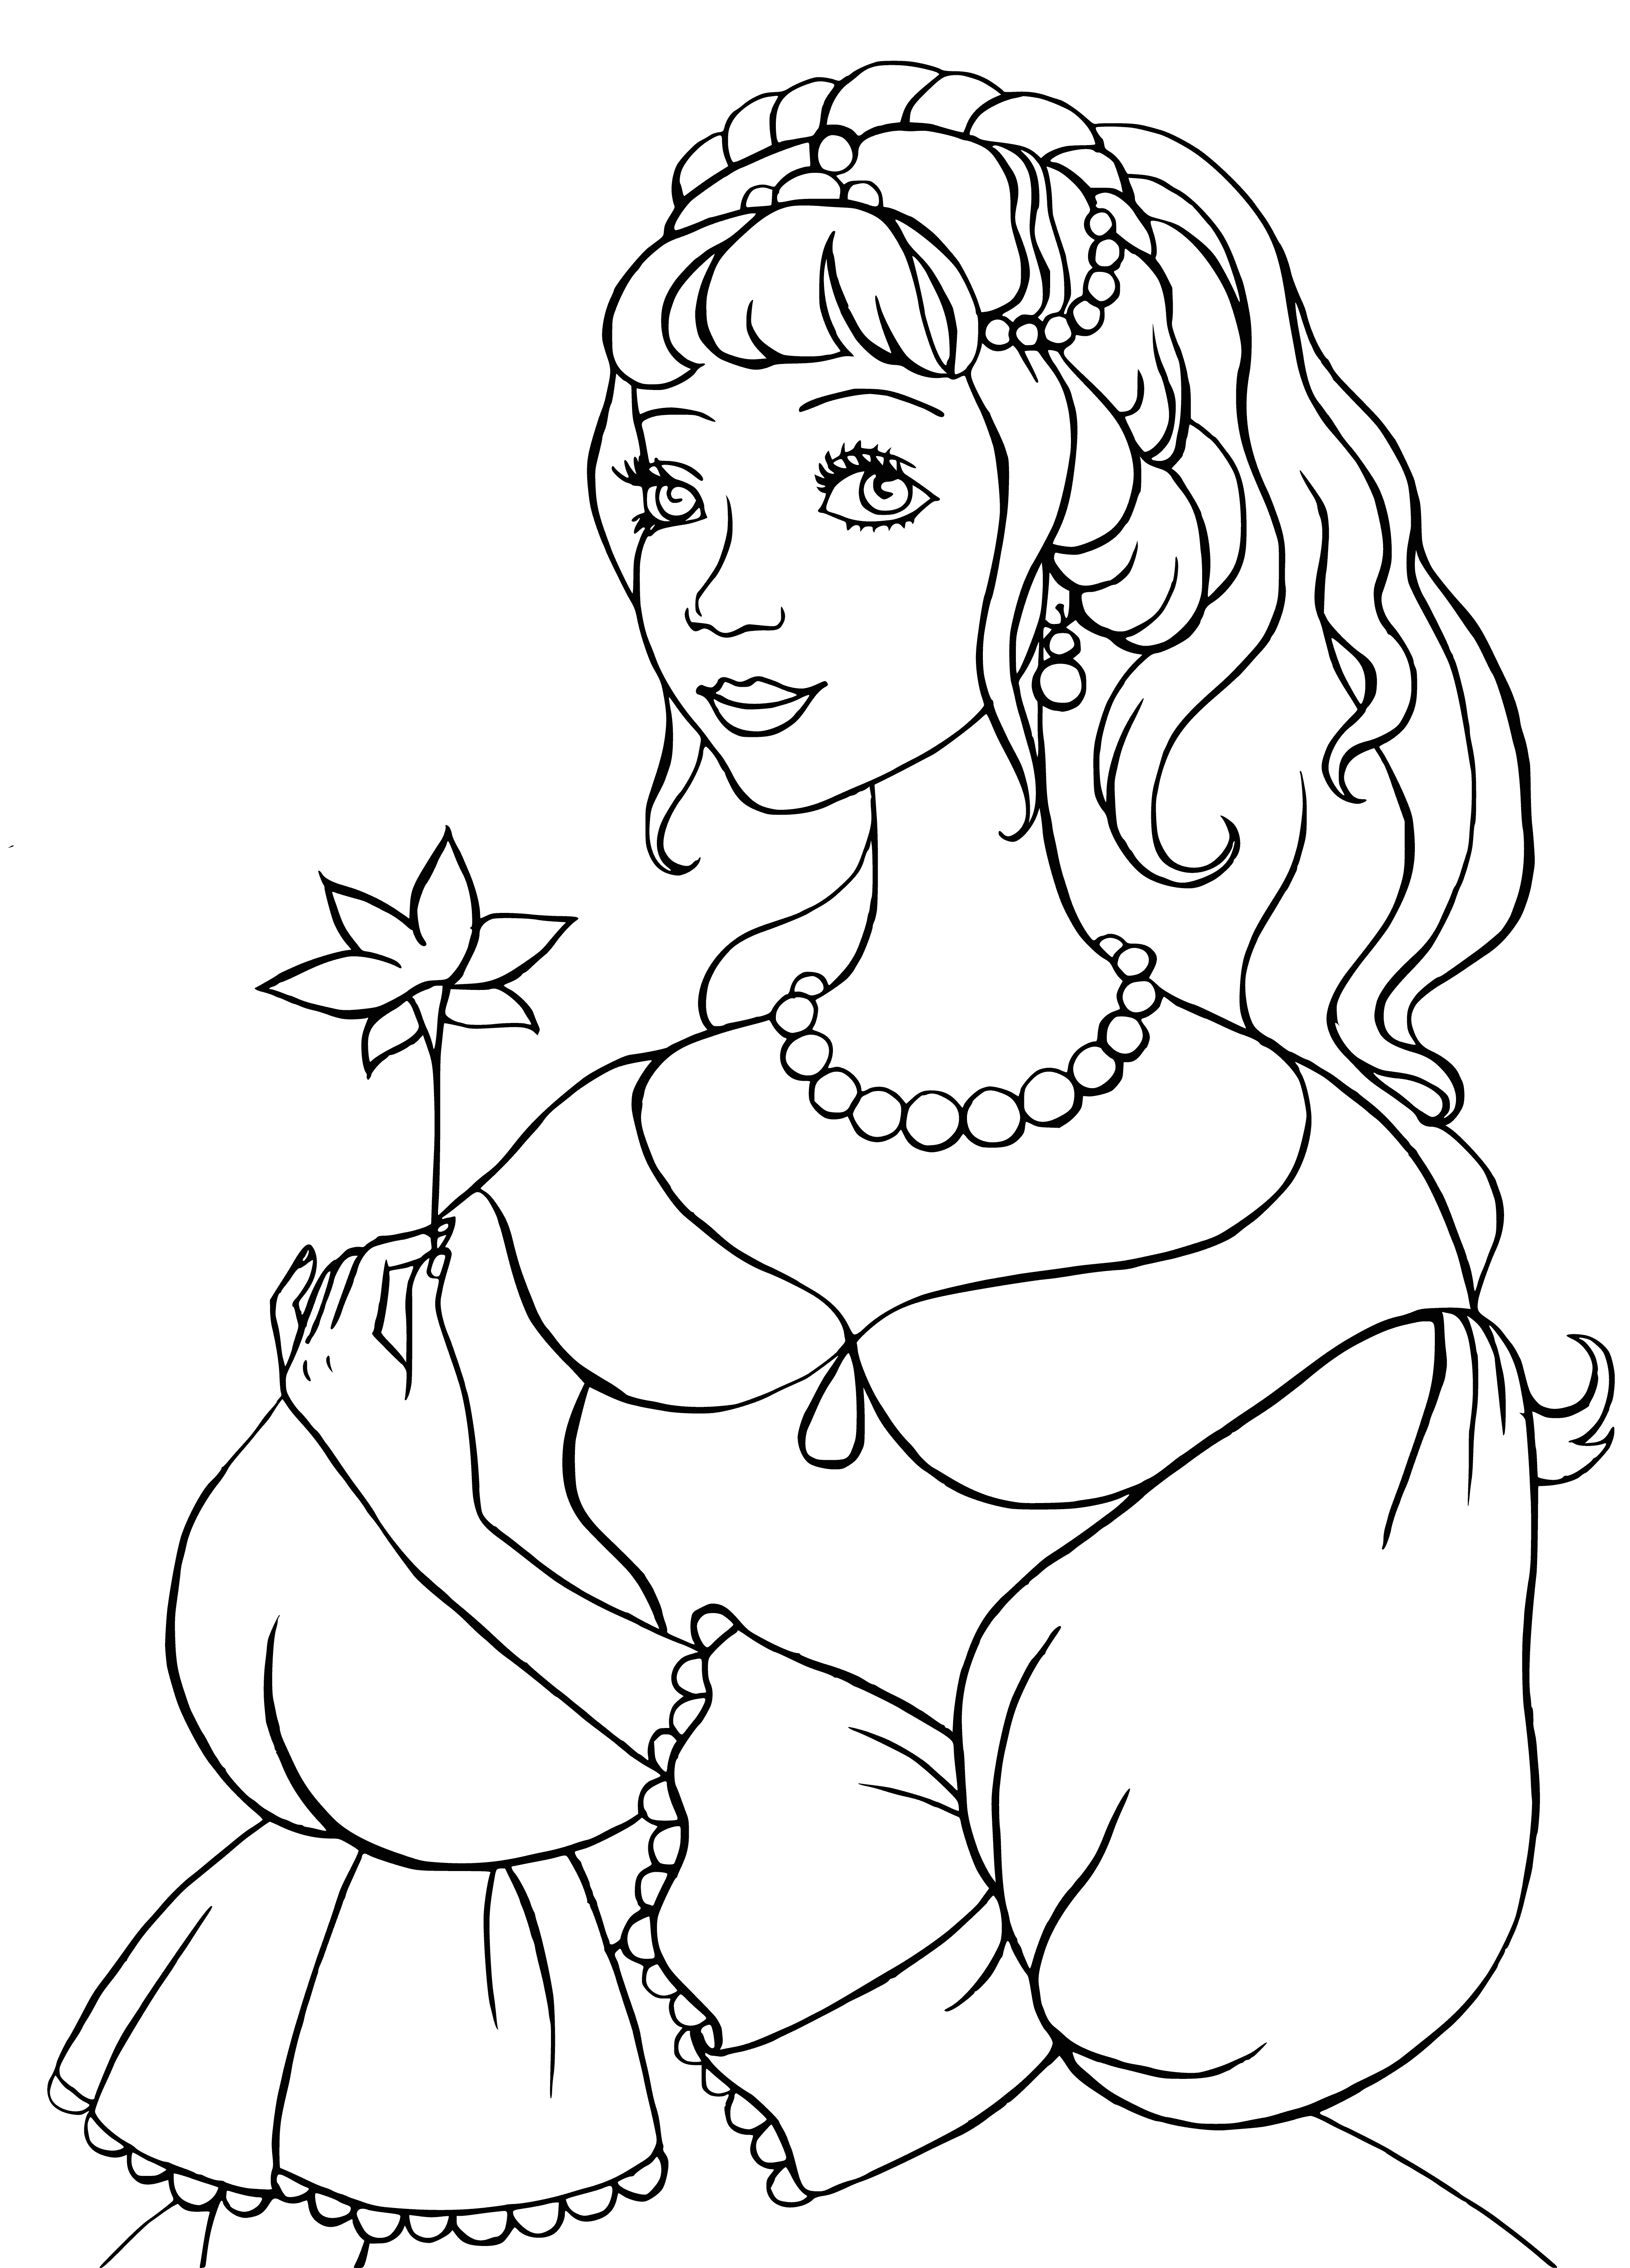 coloring page: Princess sits on throne, wearing pink dress and crown, arms on armrests, scepter in right hand. Happy and content.